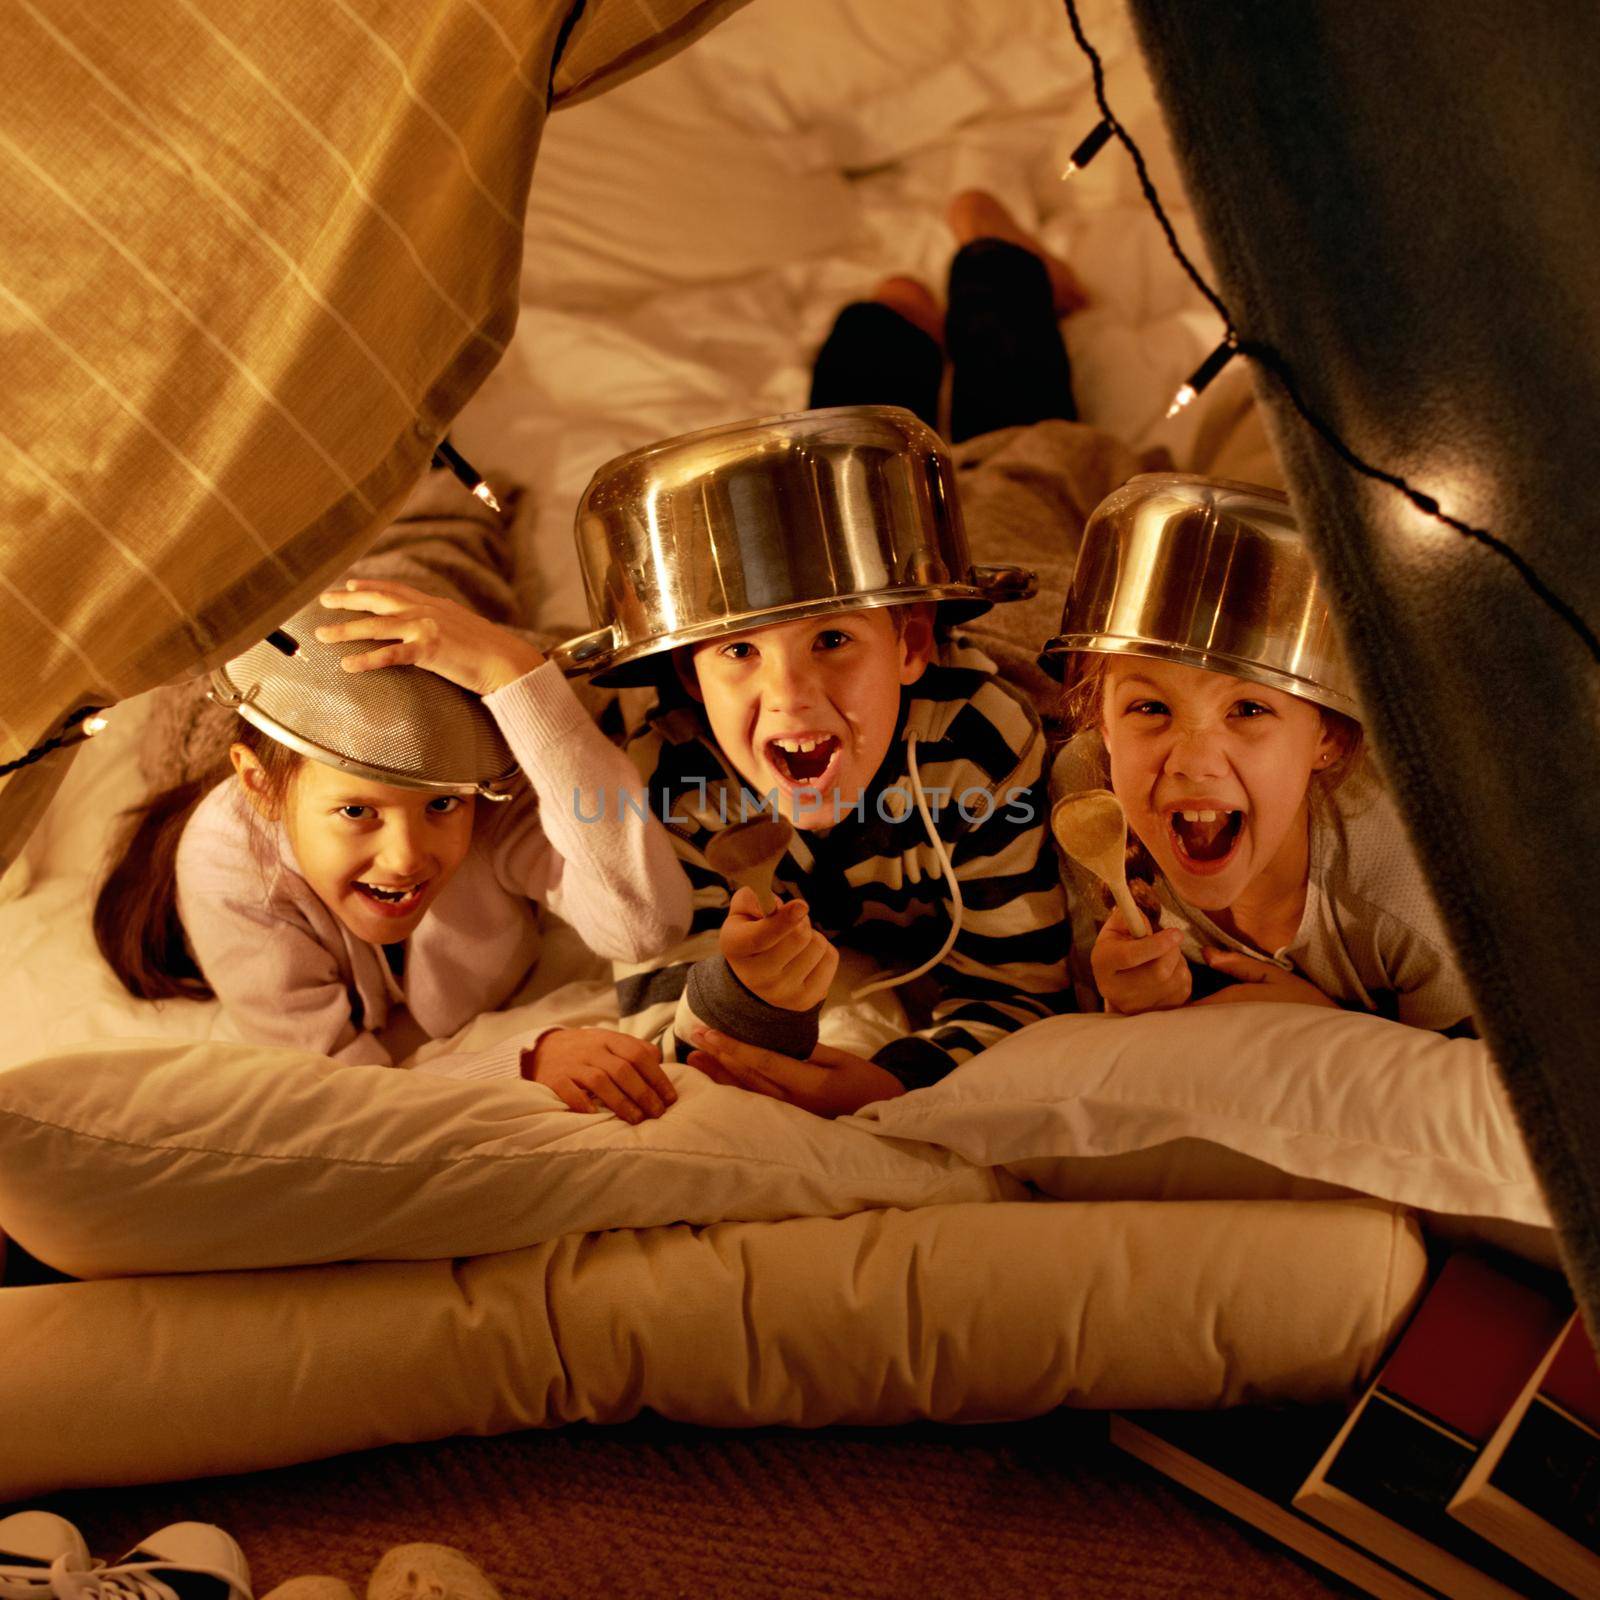 Youll never take us. cute little children with pot helmets in a blanket fort. by YuriArcurs